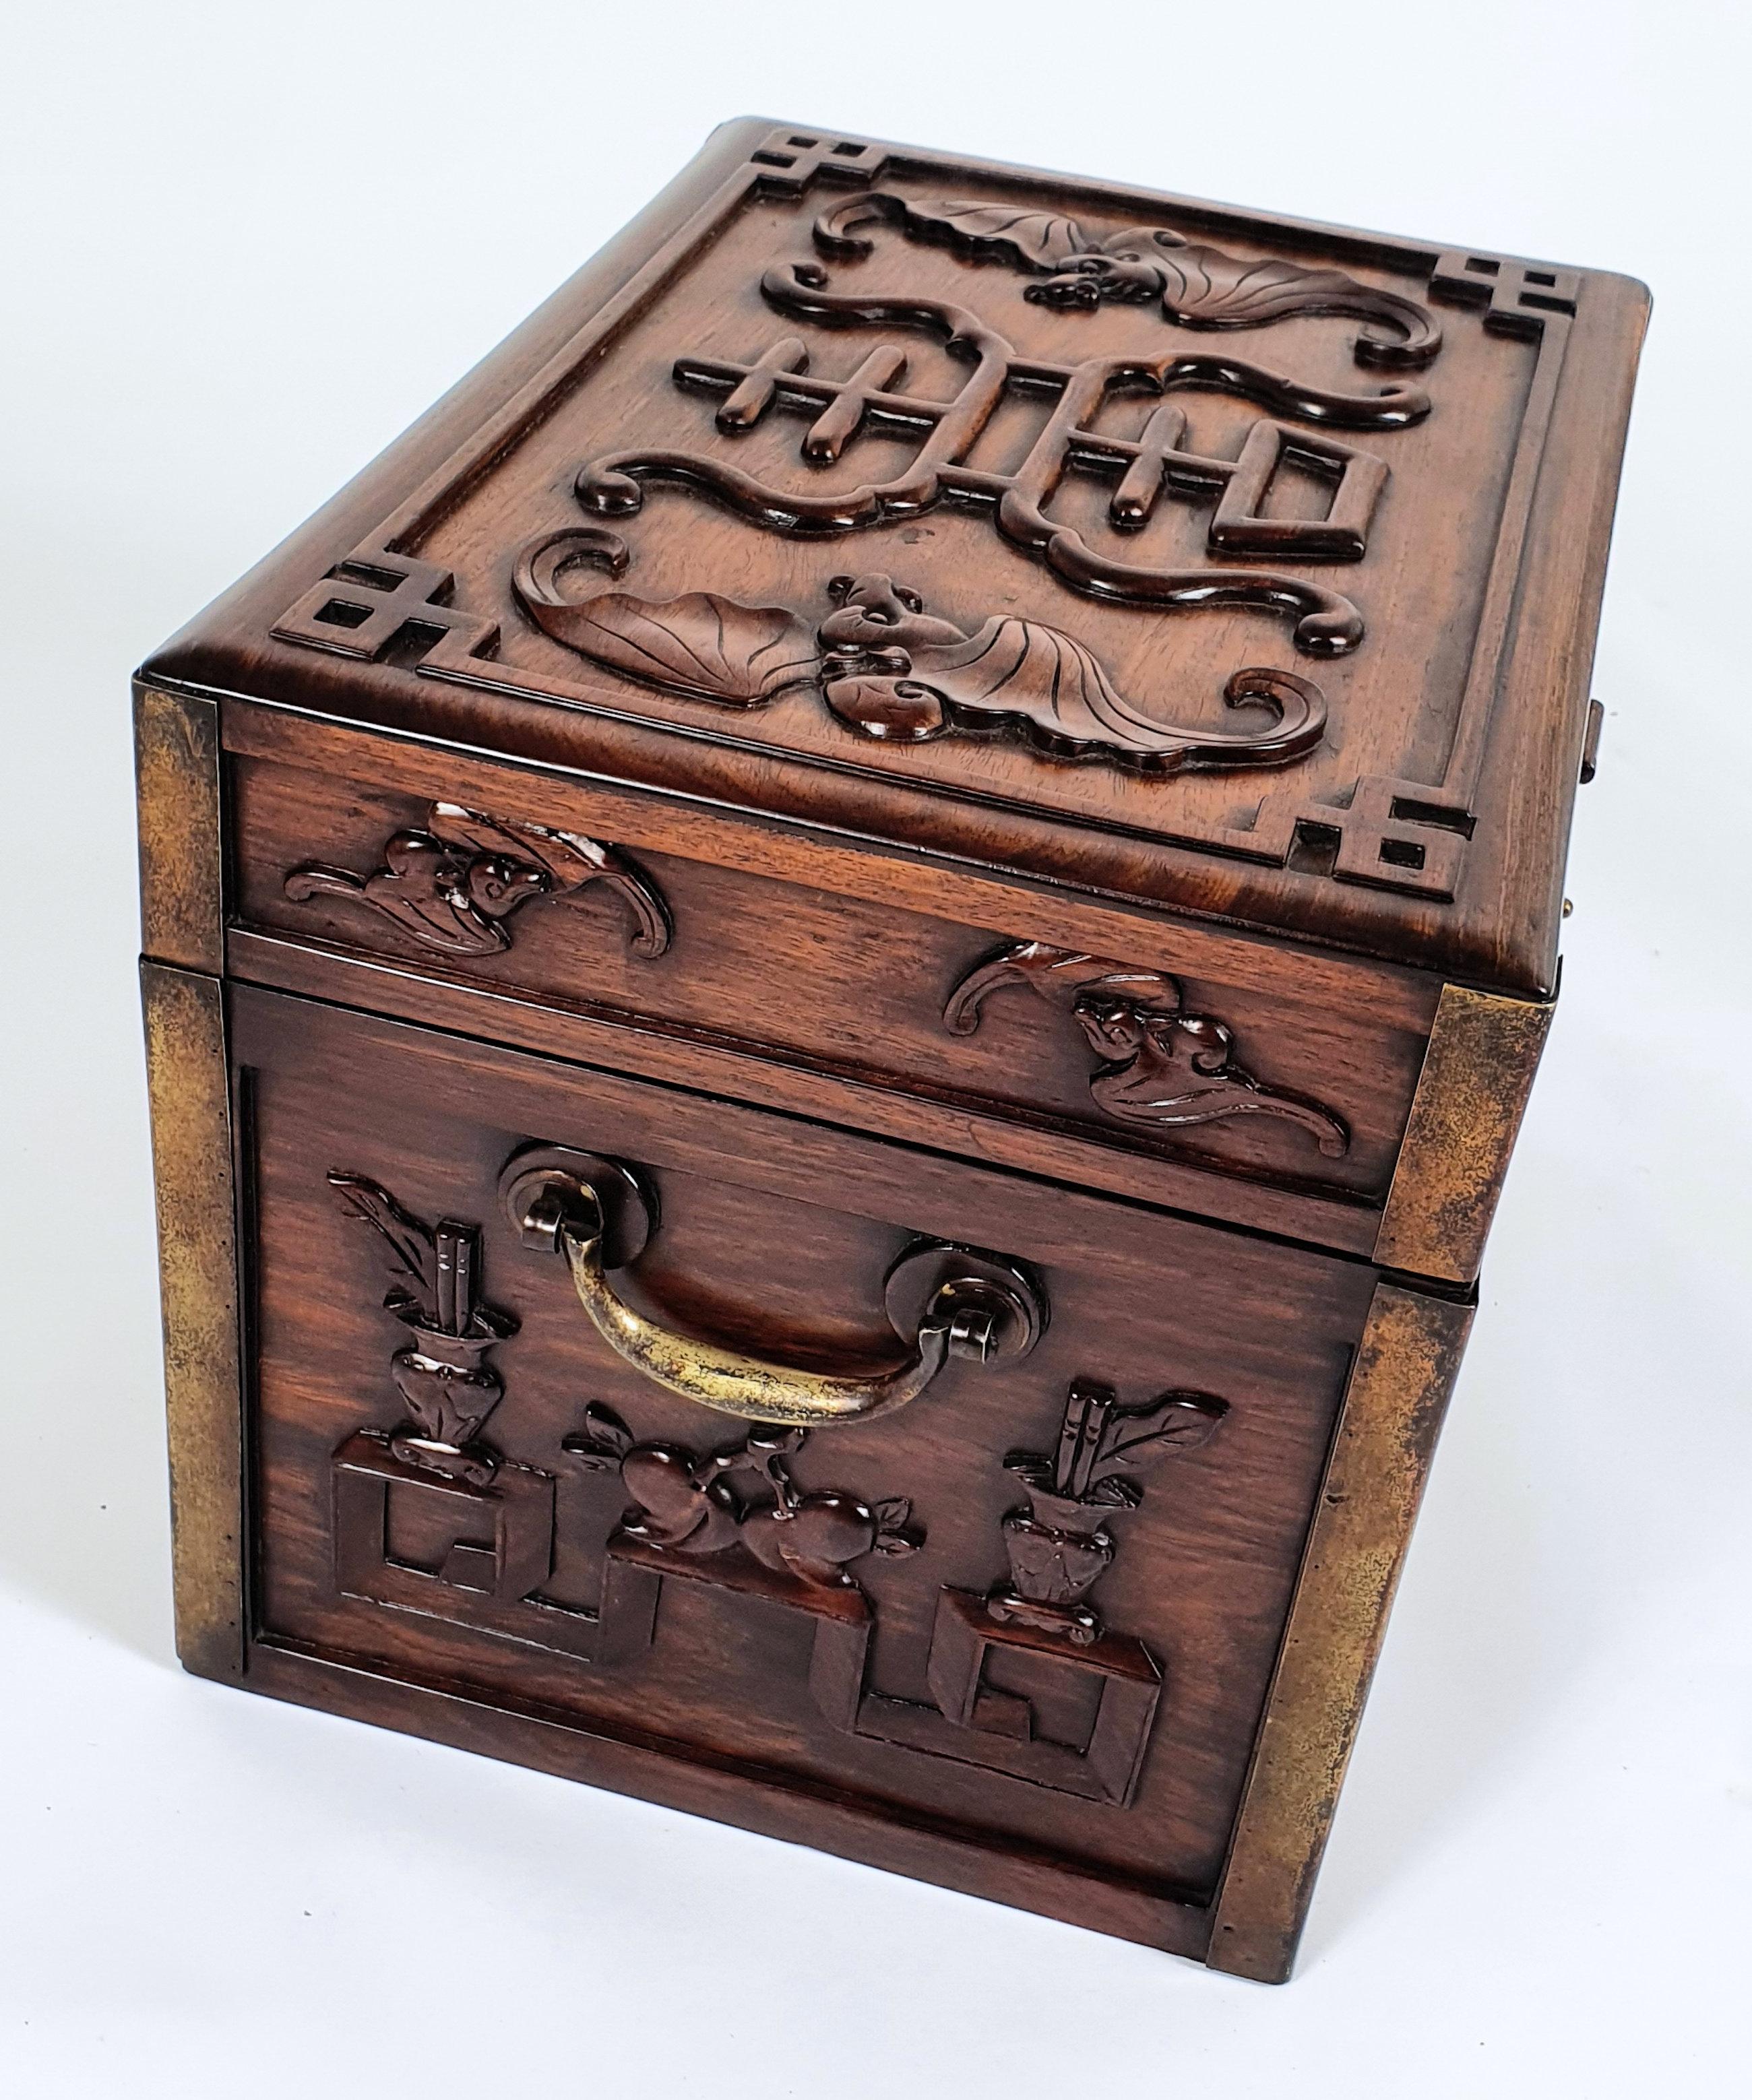 This magnificent and ornately carved 19th century Chinese carved hardwood documents box features brass corners, hinges and lock. It is decorated with bats, jardinières of flowers and precious objects.
The box measures 16 ¾ in – 42.5 cm wide, 12 in